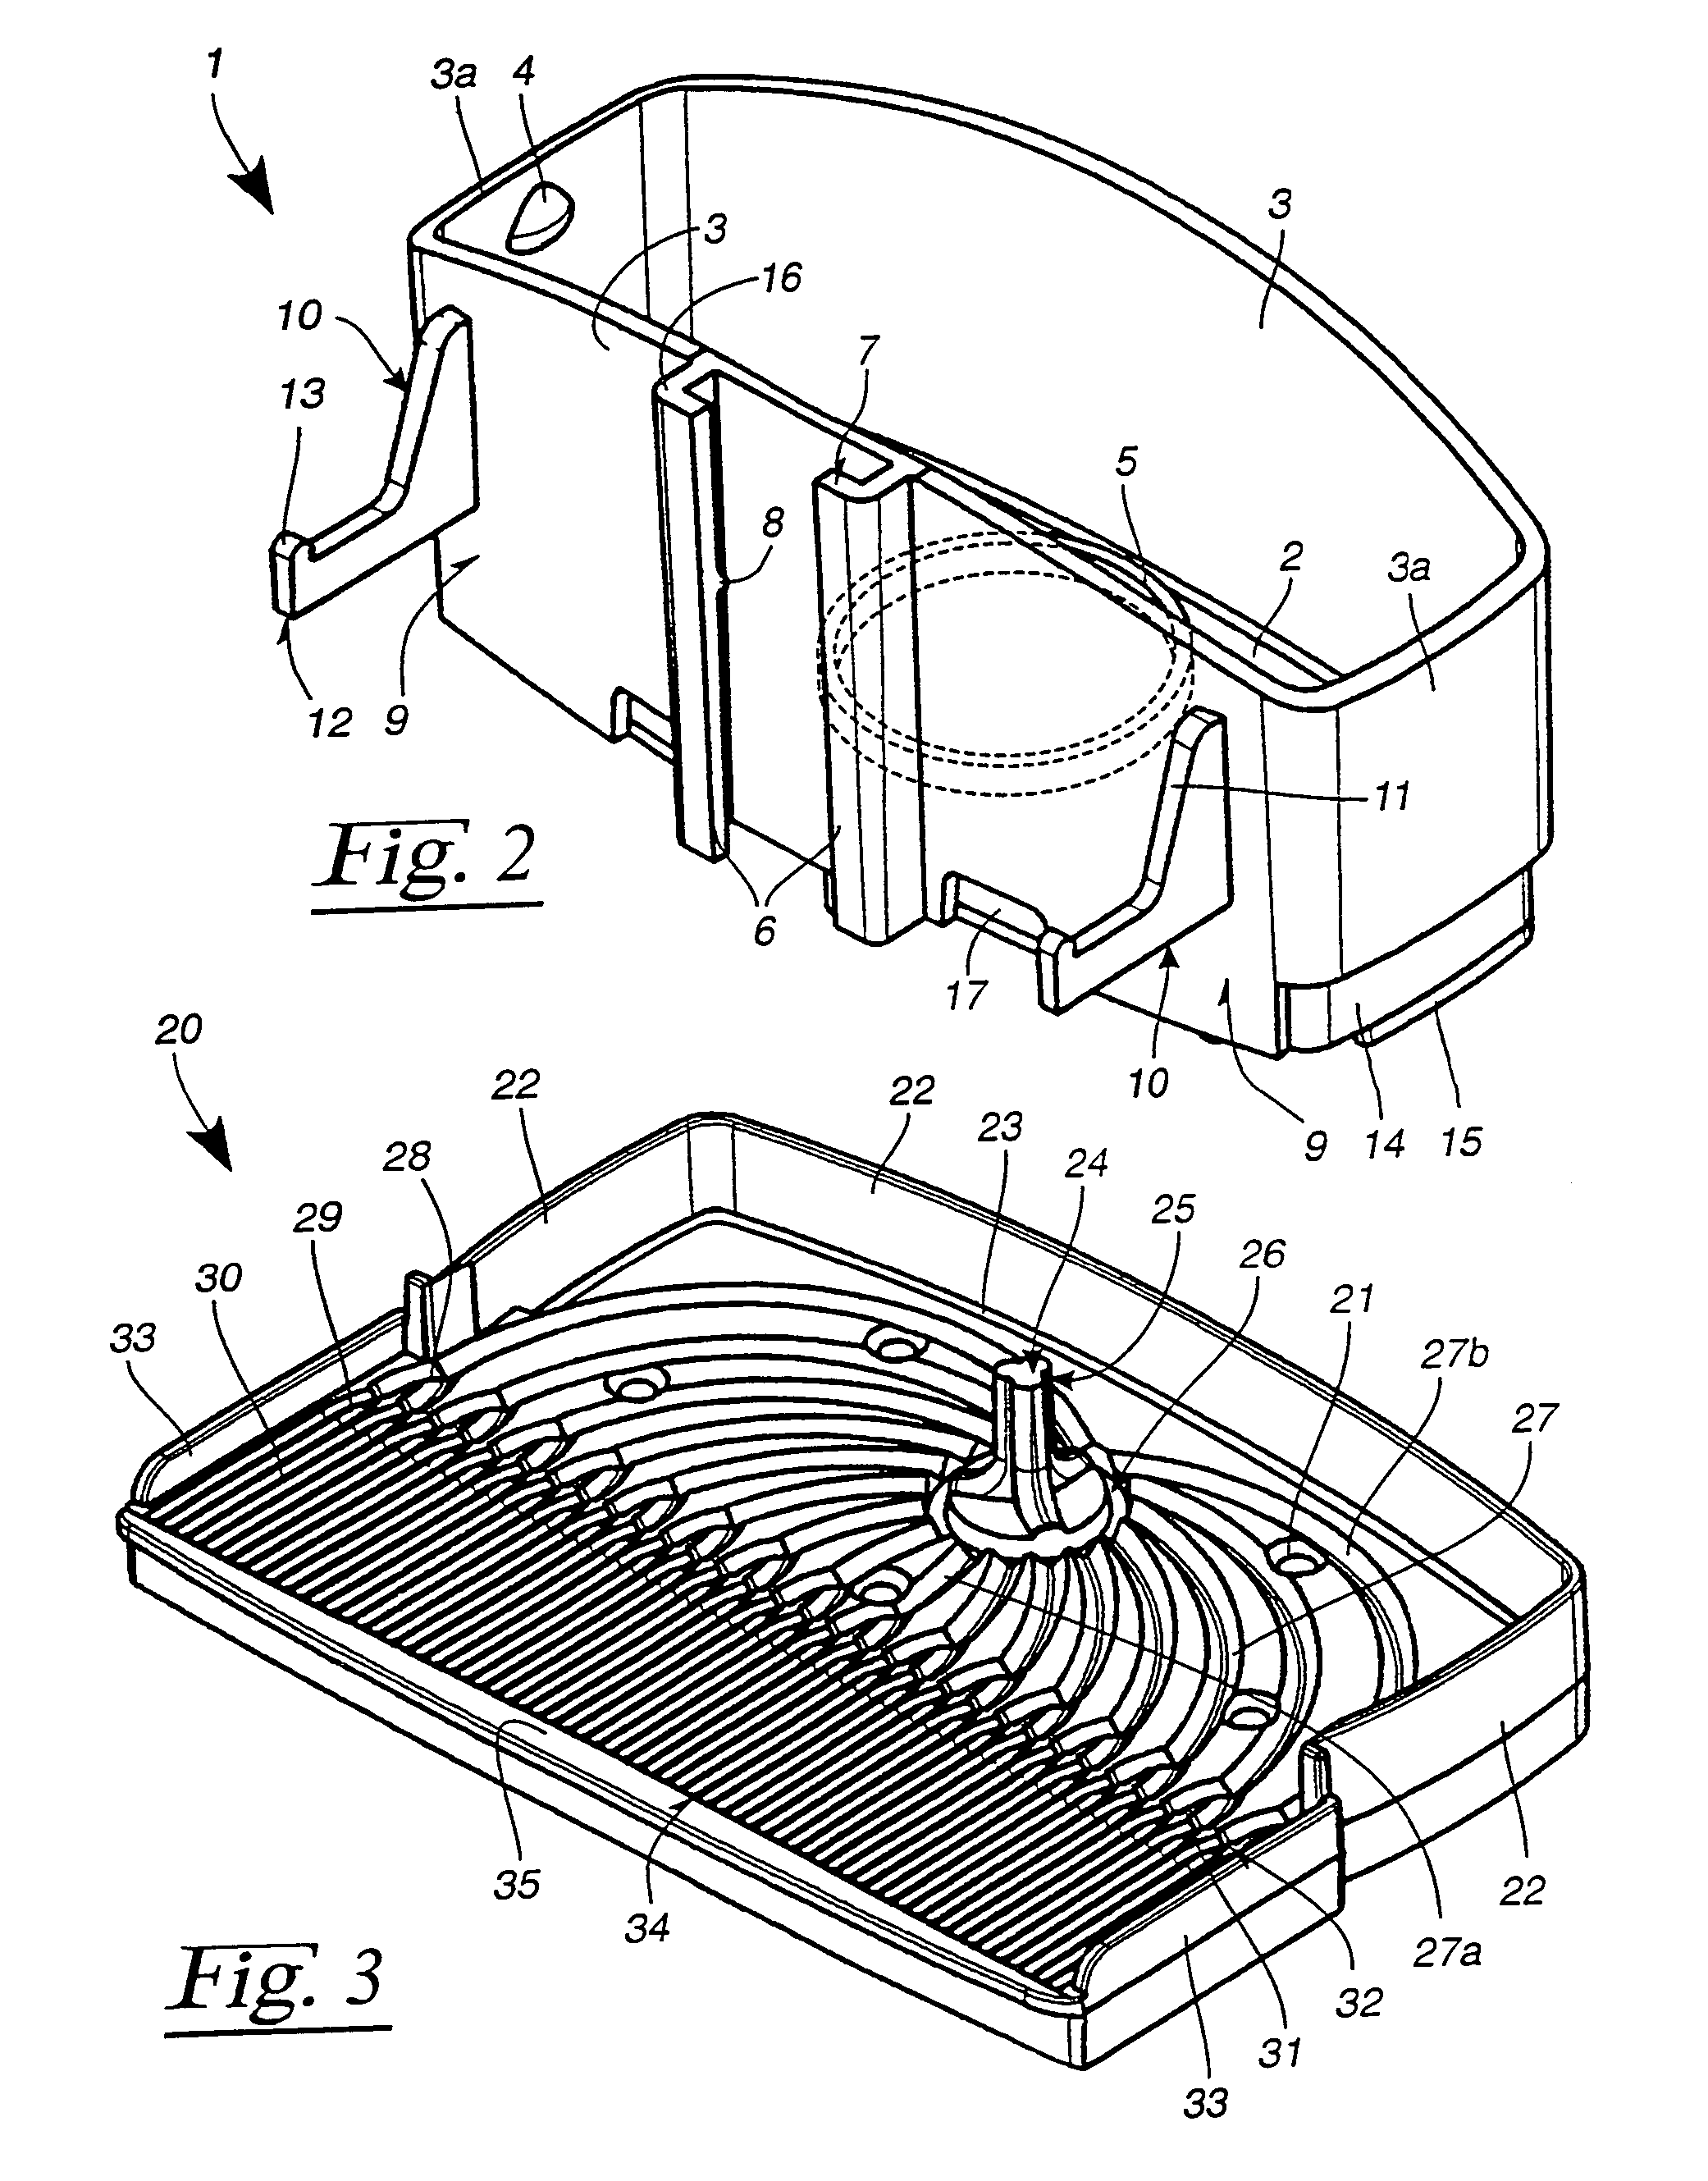 Device for dispensing a liquid active substance